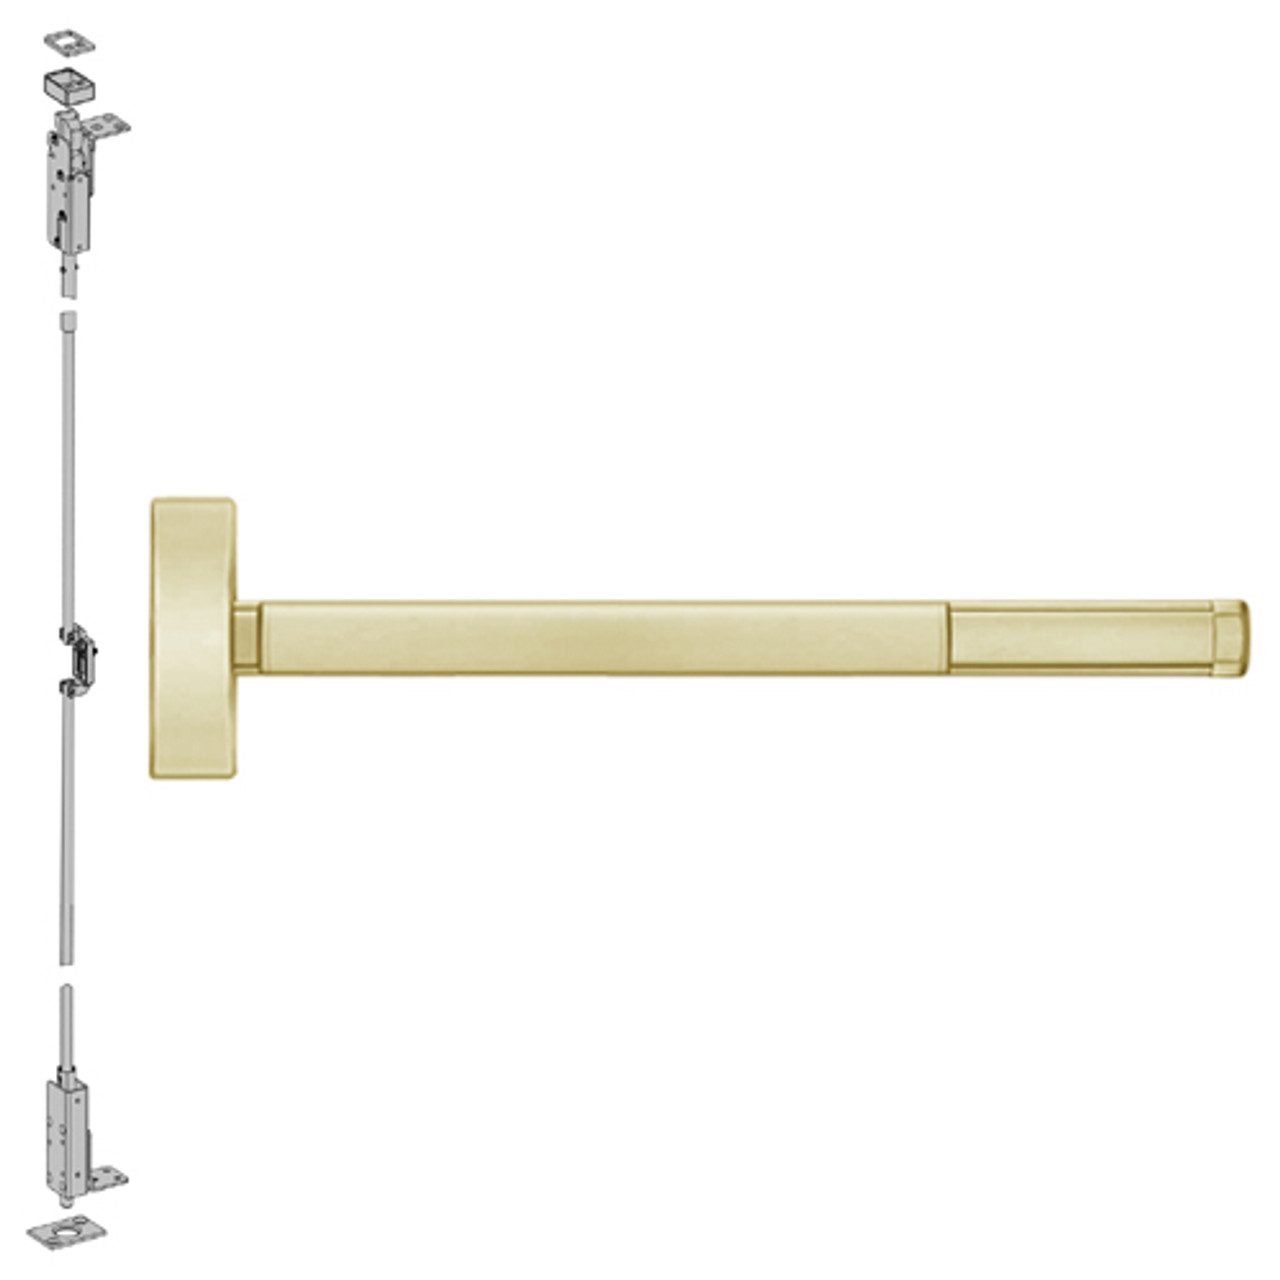 2715LBR-606-36 PHI 2700 Series Wood Door Concealed Vertical Rod Device Prepped for Thumbpiece Always Active with Less Bottom Rod in Satin Brass Finish